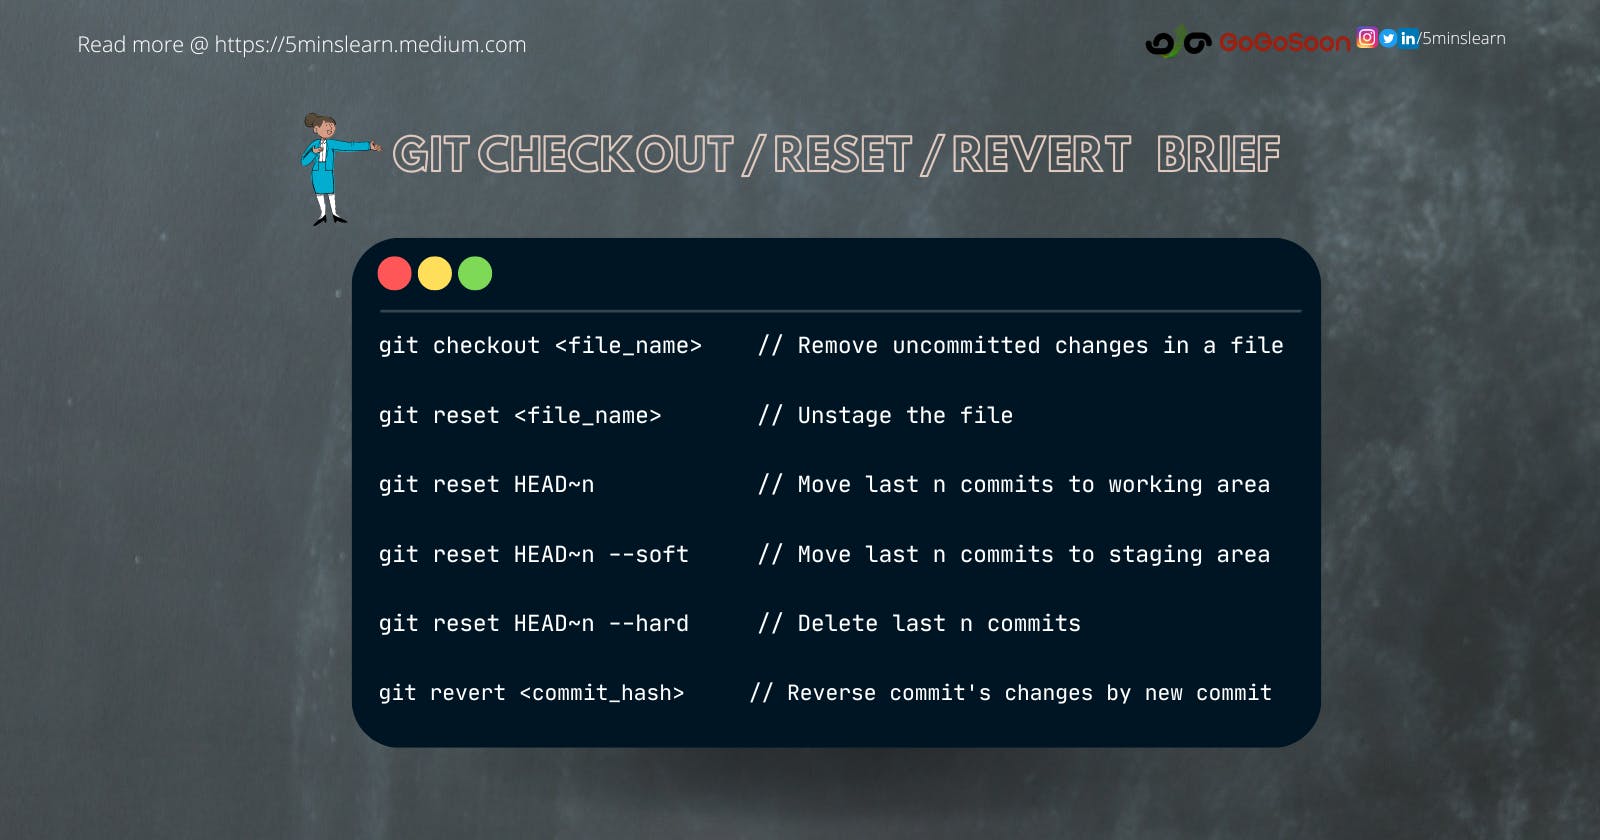 Git Checkout, Reset, Revert. When to use what?